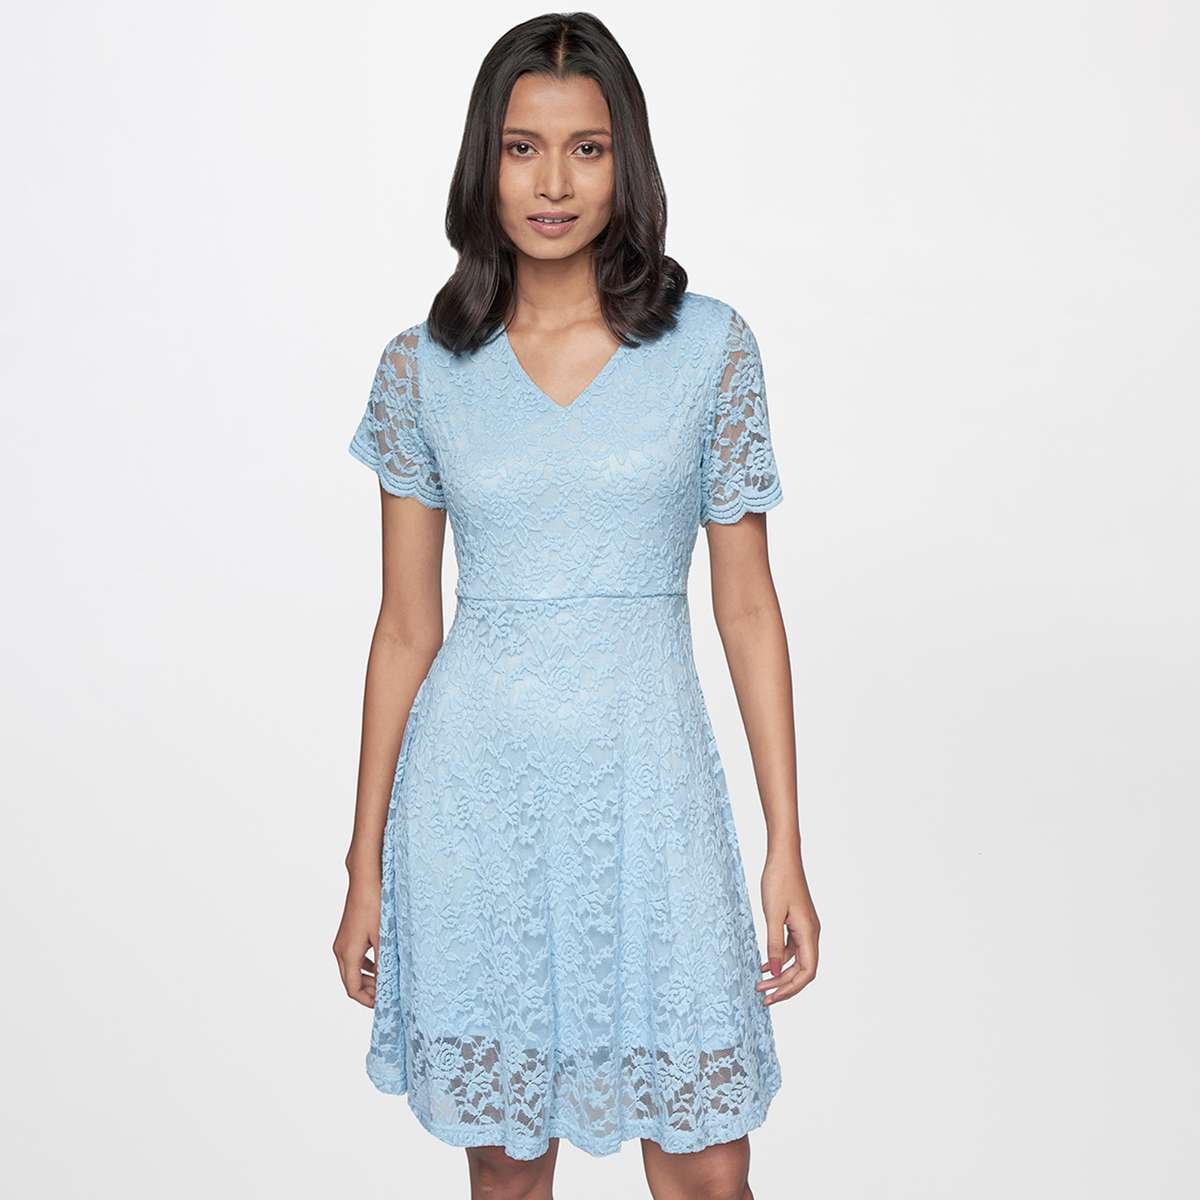 1.AND Women Textured A-Line Lace Dress